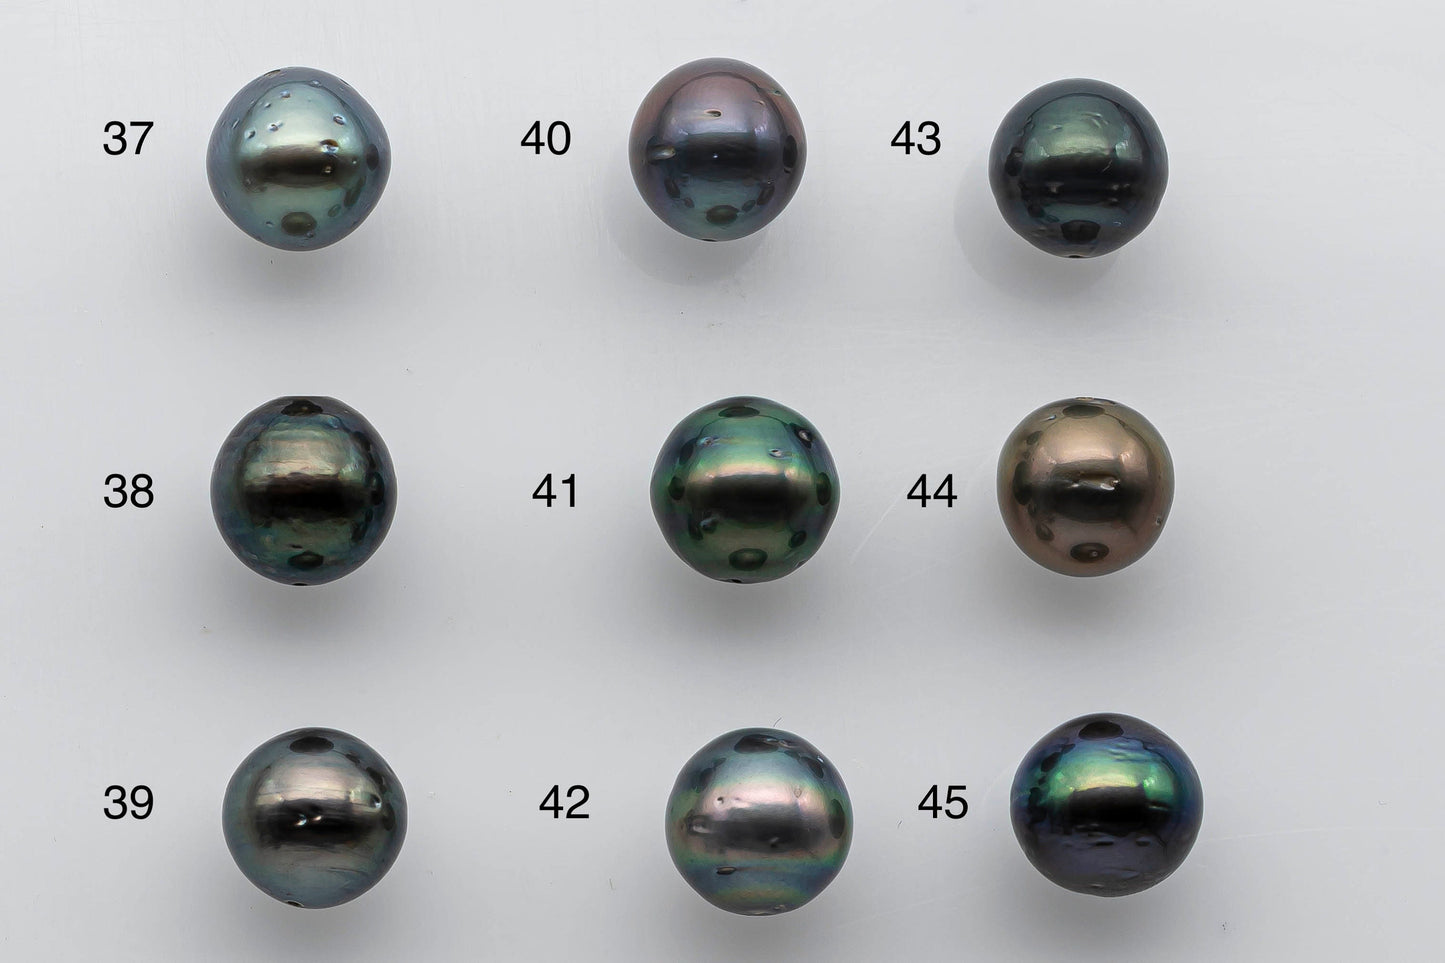 10-11mm Single Piece Tahitian Pearl Near Round in Natural Colors and High Lusters with Blemish, Predrilled Hole, SKU # 1395TH